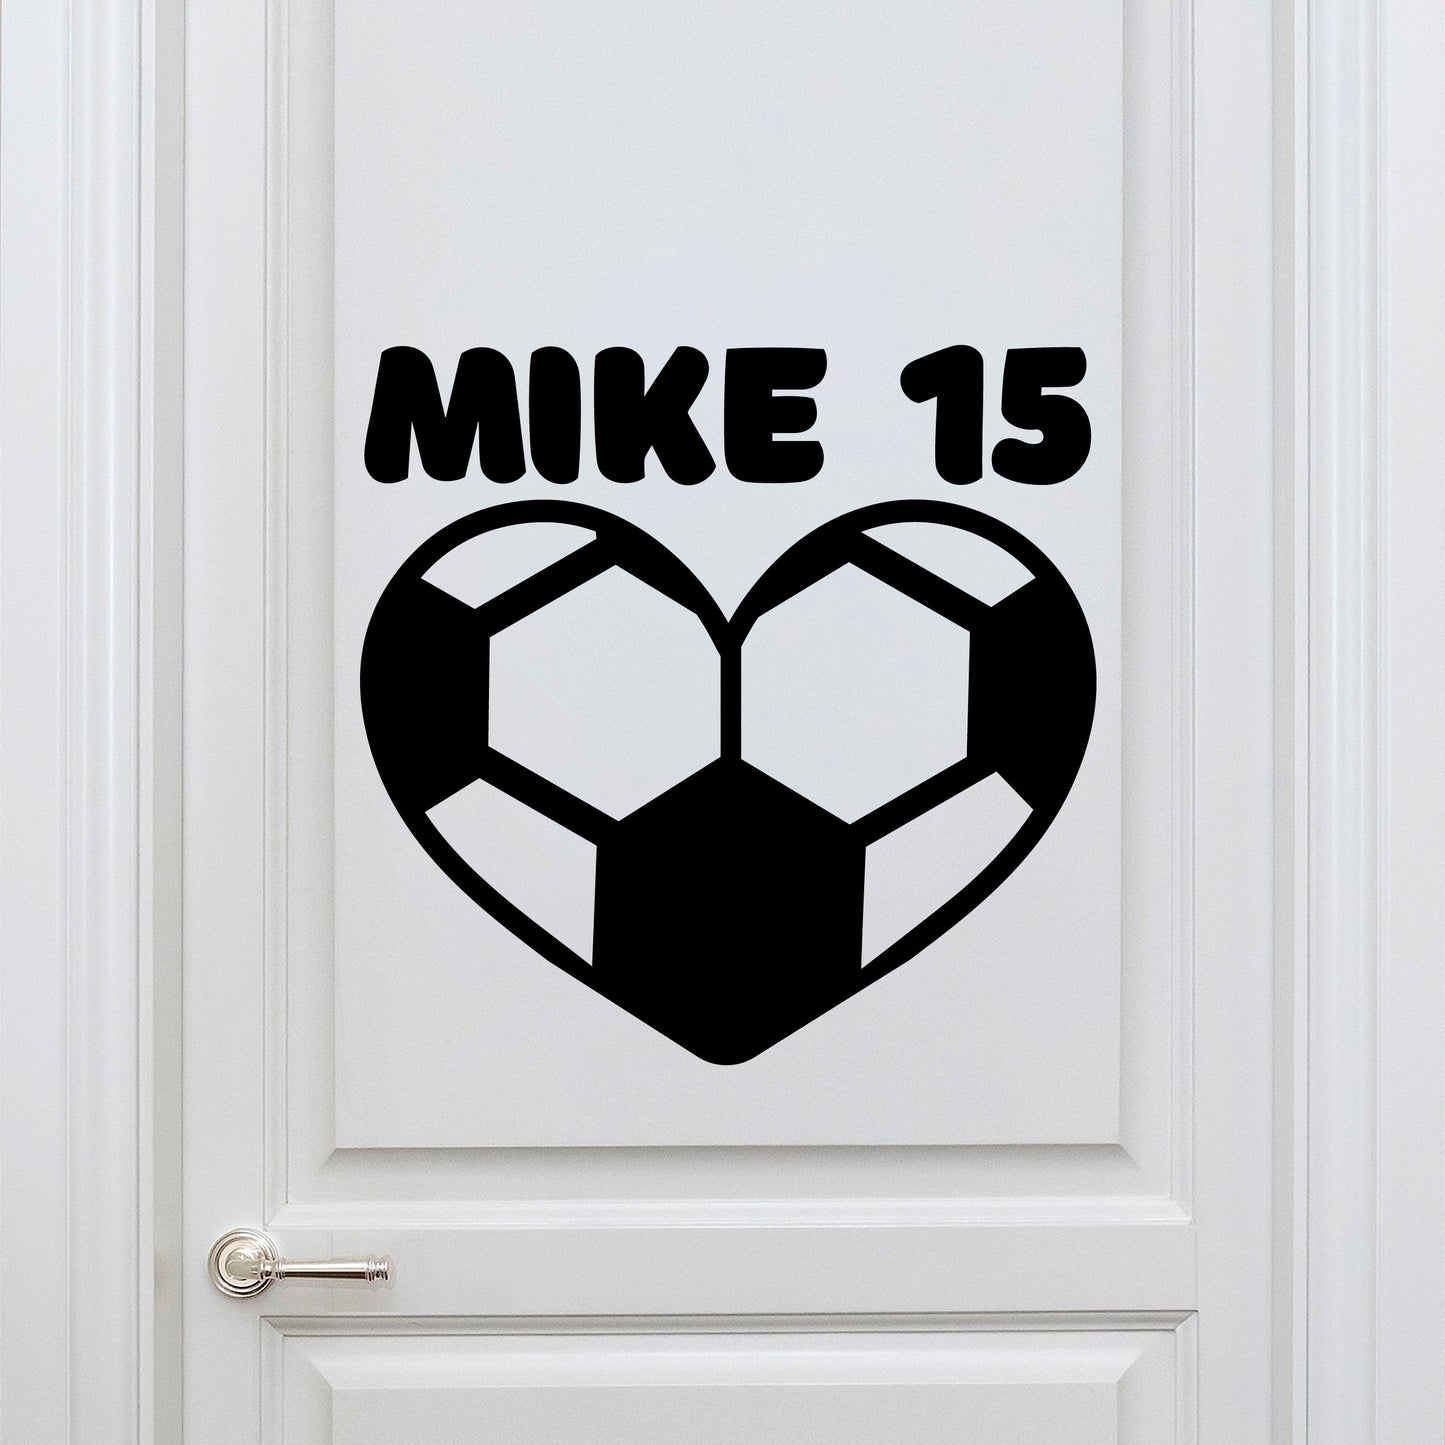 Soccer Silhouette Wall Decal - Wall Decal Soccer Players - Custom Name Wall Decal Soccer - Personalized Custom Soccer Player Wall Decal